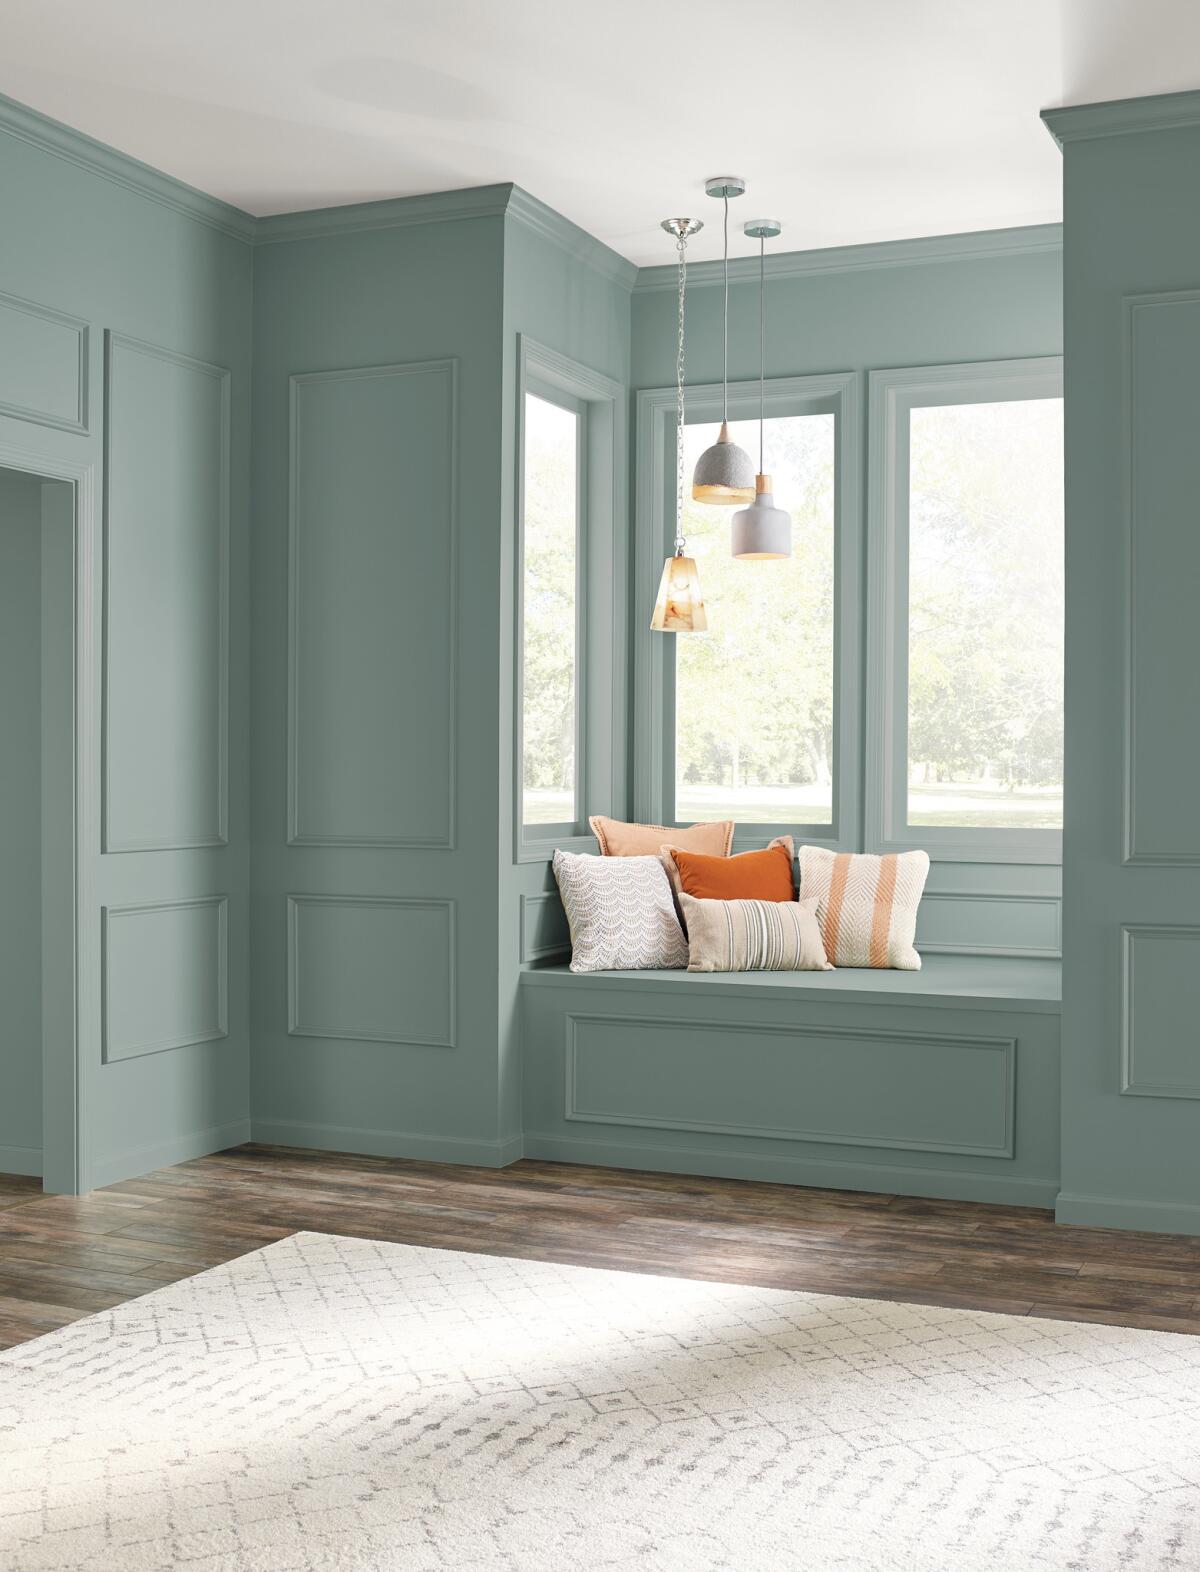 In The Moment was chosen by Behr as their 2018 color of the year.